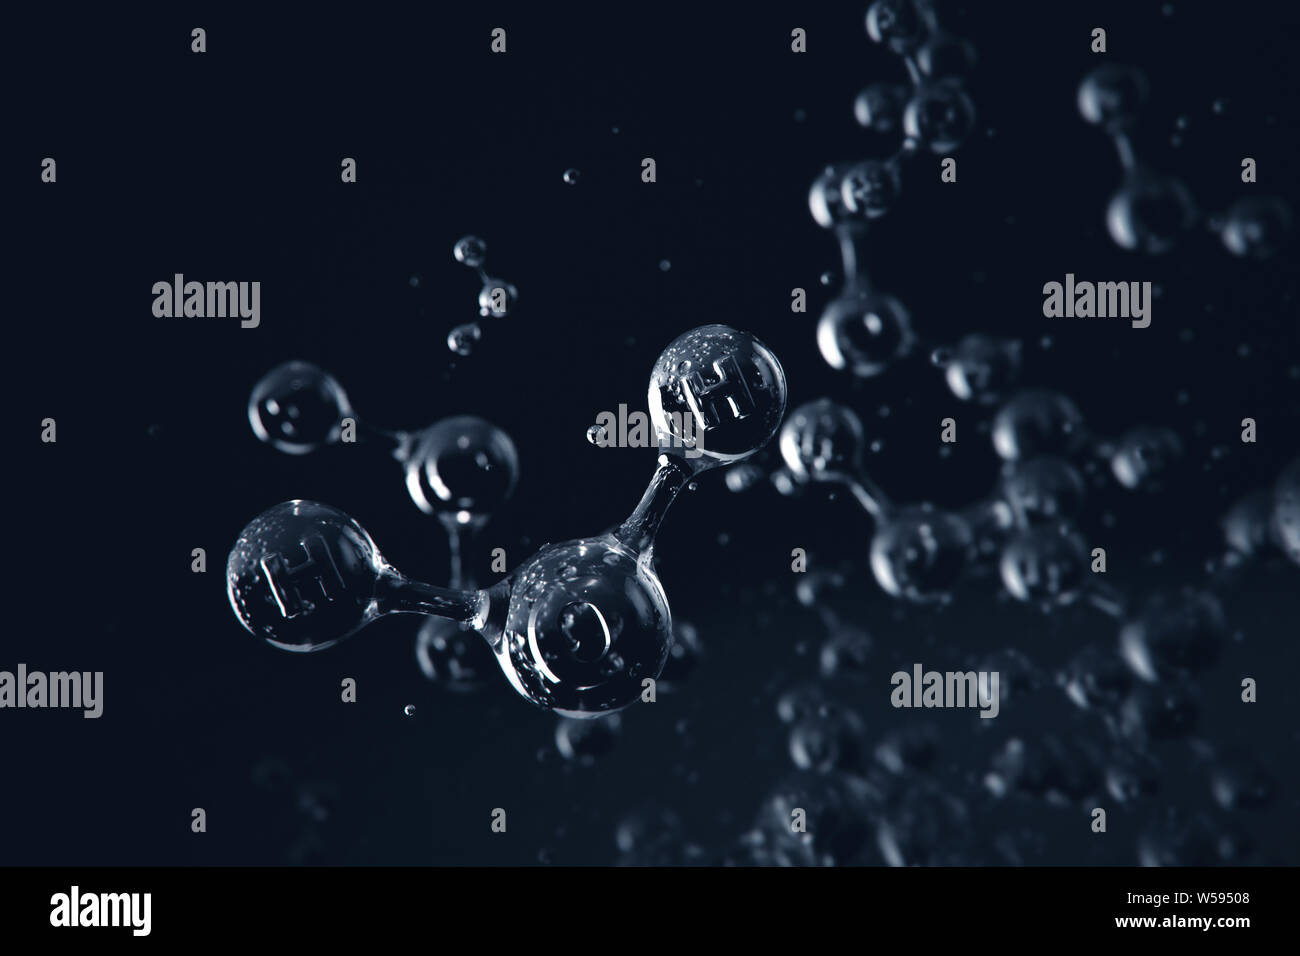 Three dimensional illustration. Abstract concept of water molecules Stock Photo